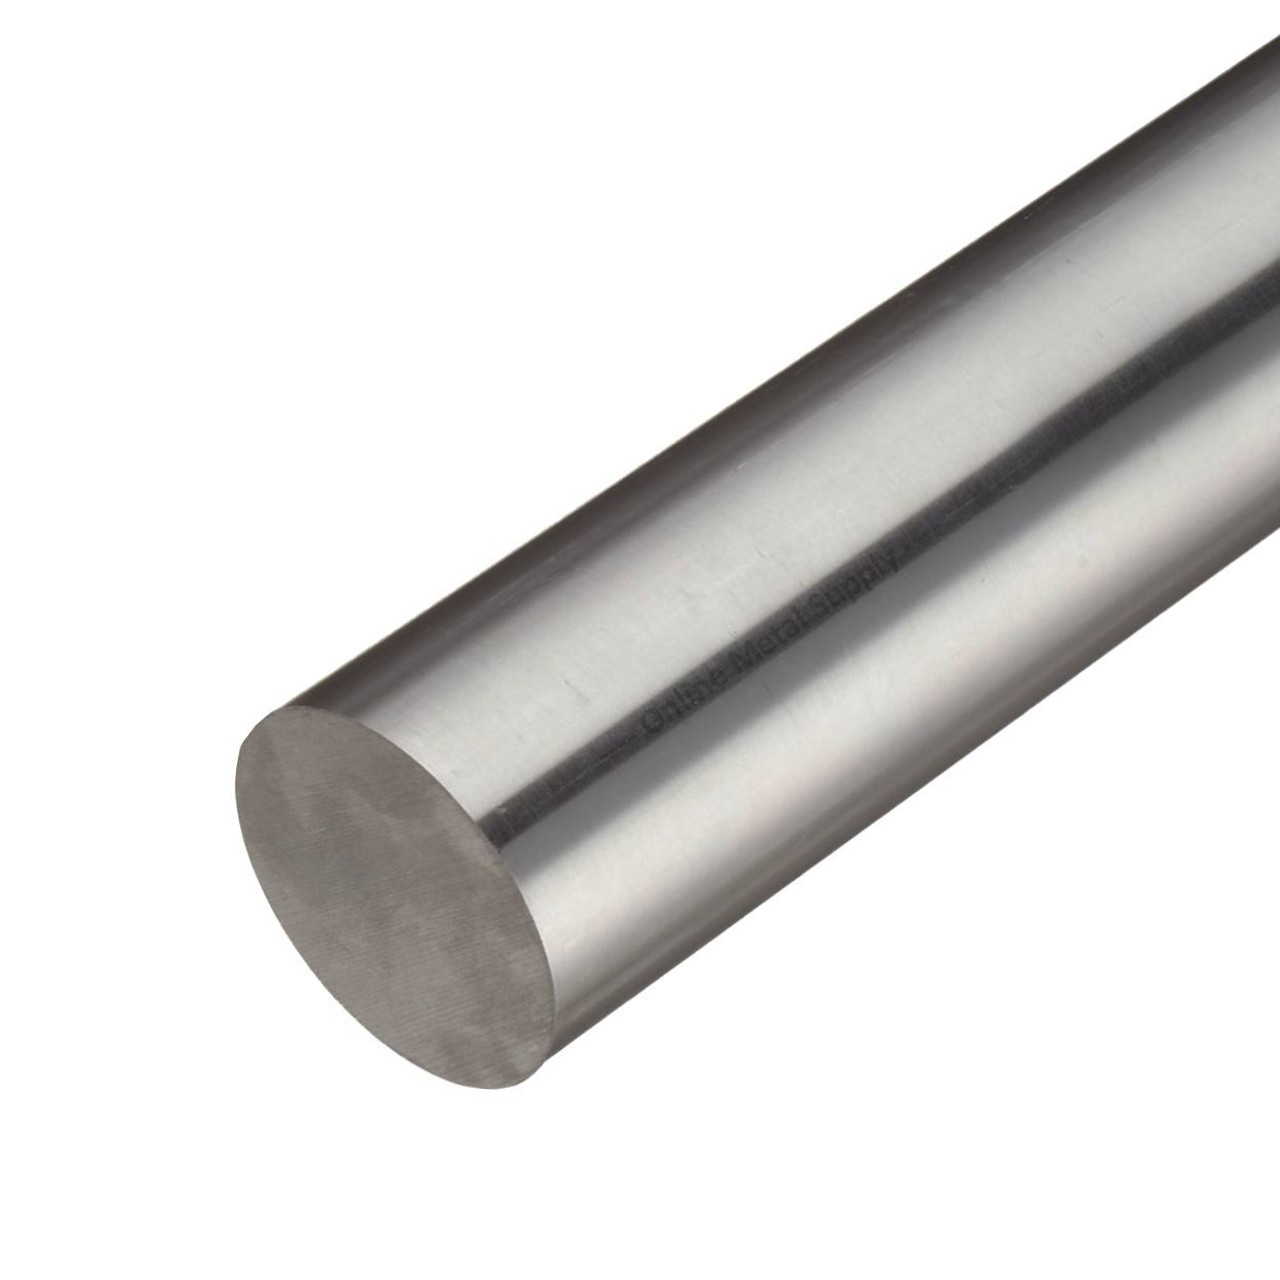 0.760 inch x 72 inches, 8620 Alloy Steel Round Rod, Turned, Ground, Polished